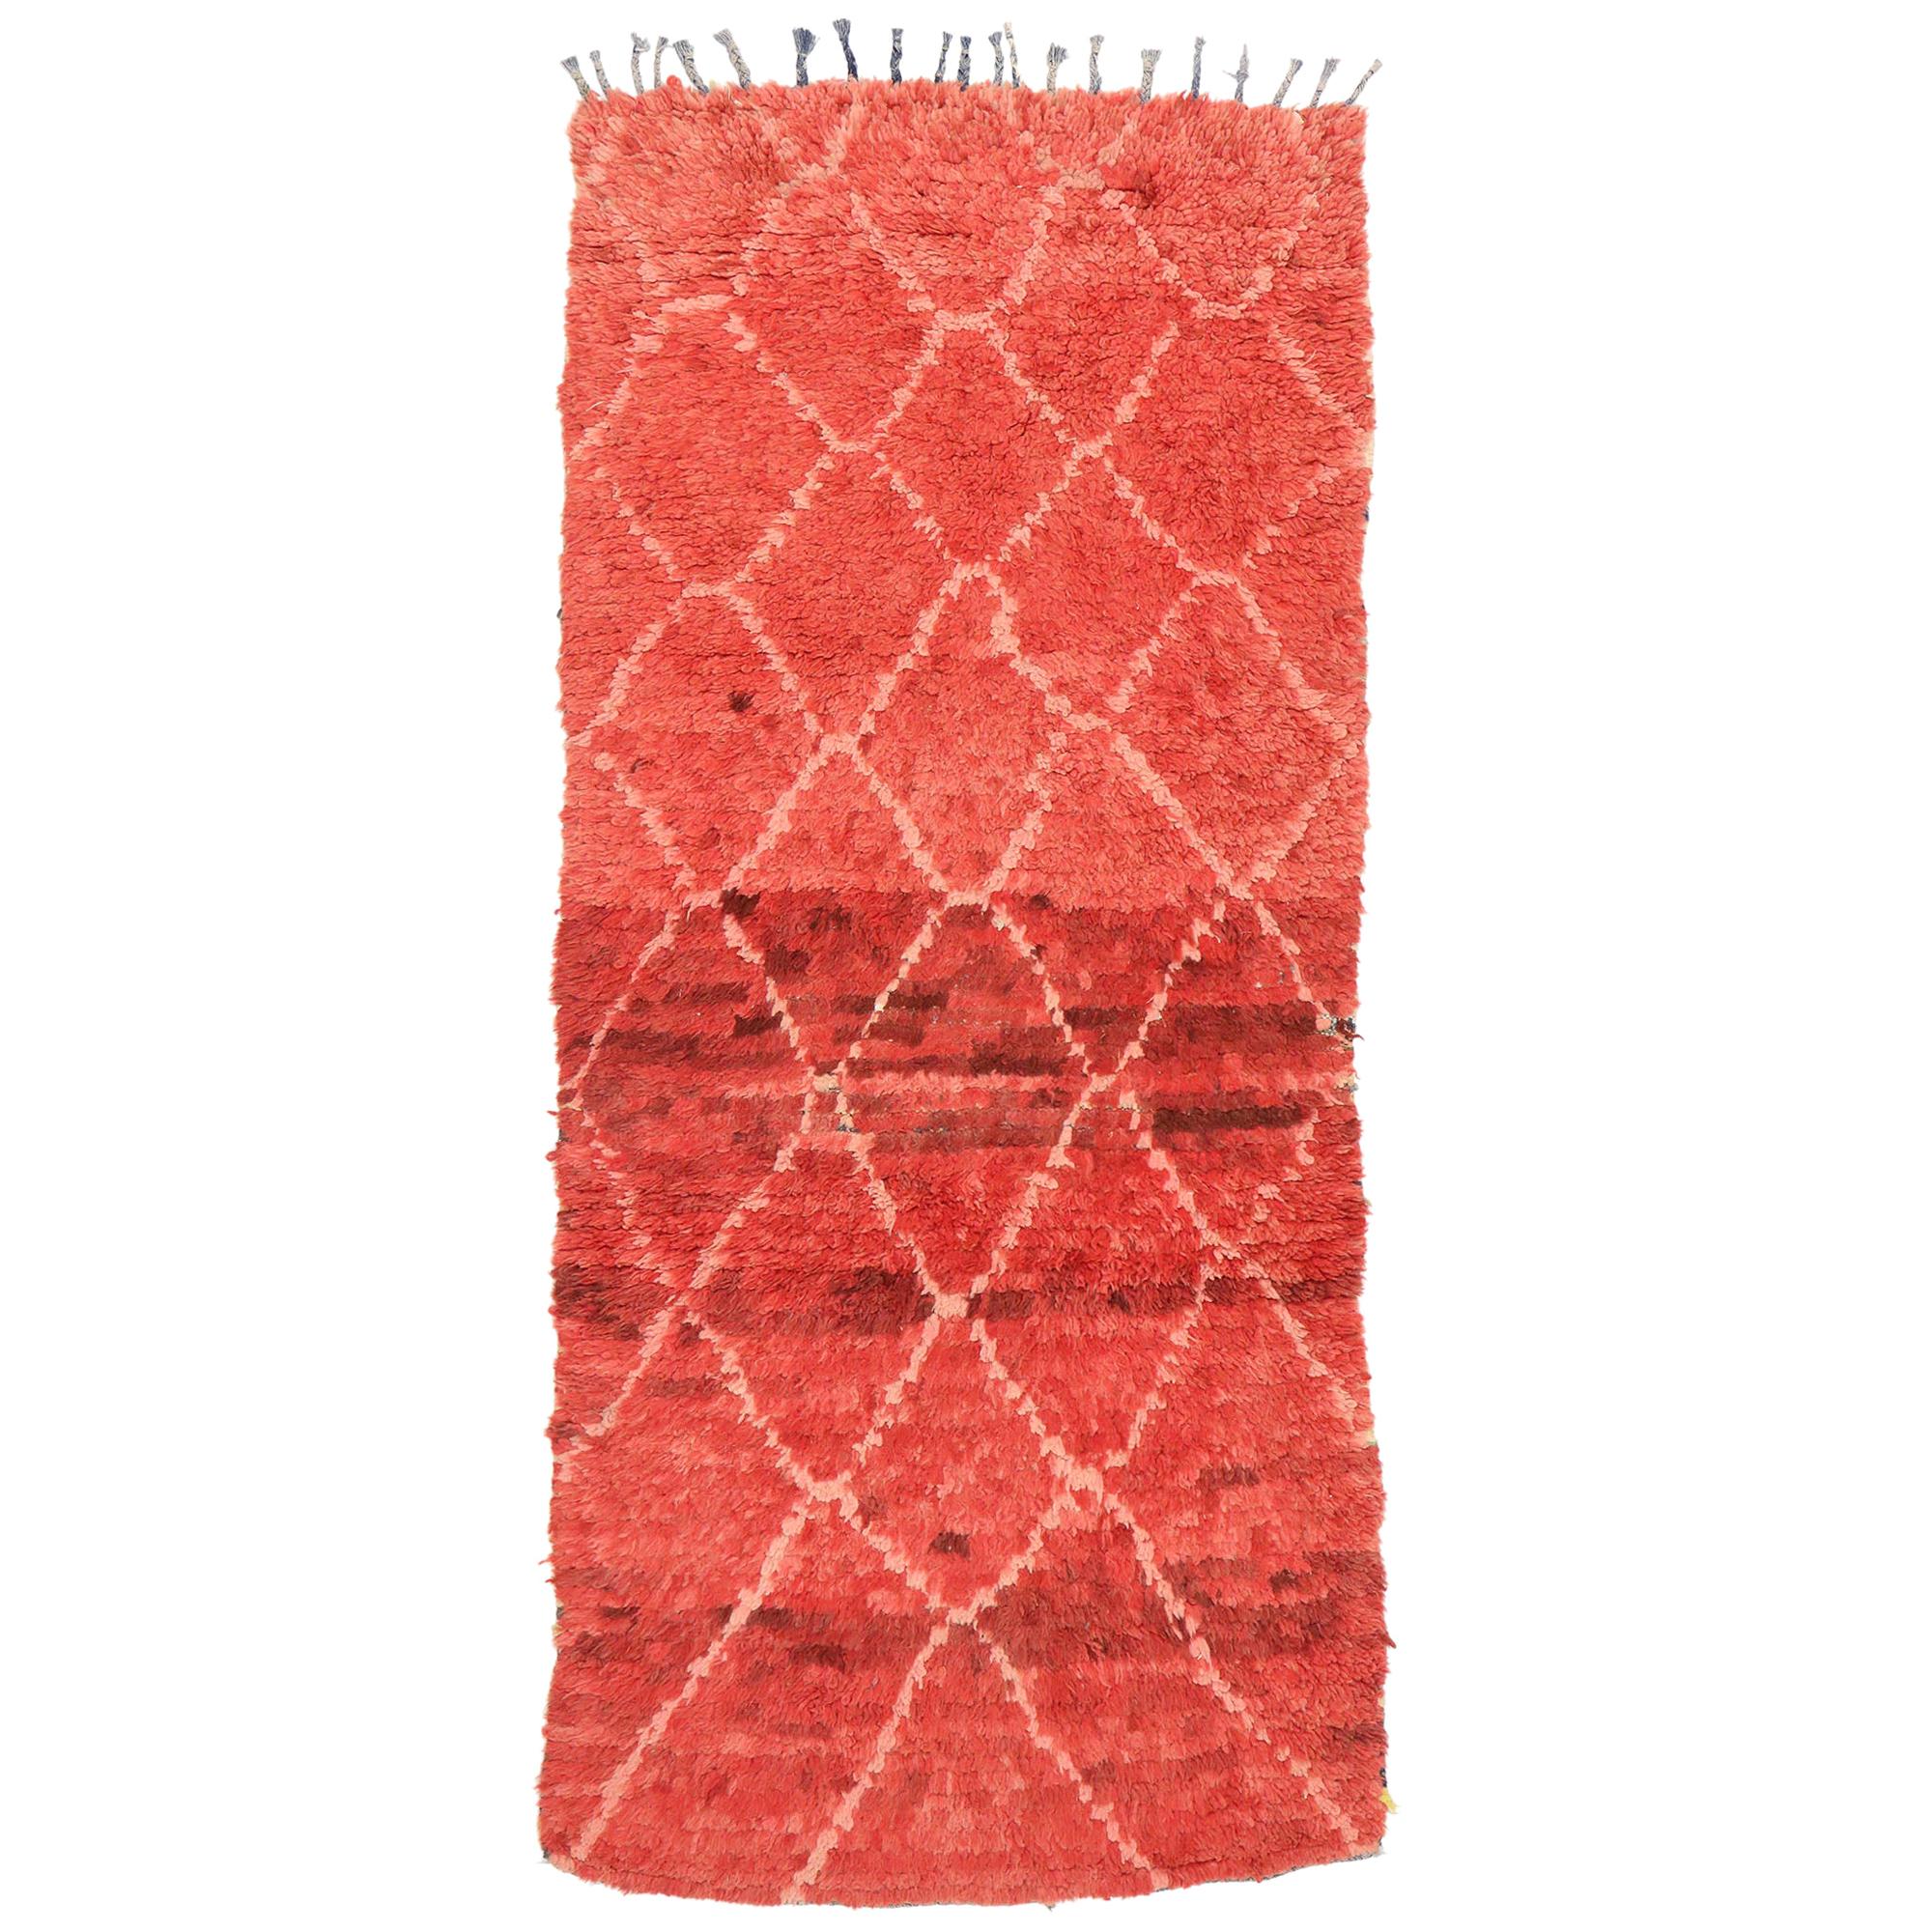 Vintage Berber Moroccan Runner with Tribal Style, Red Shag Hallway Runner